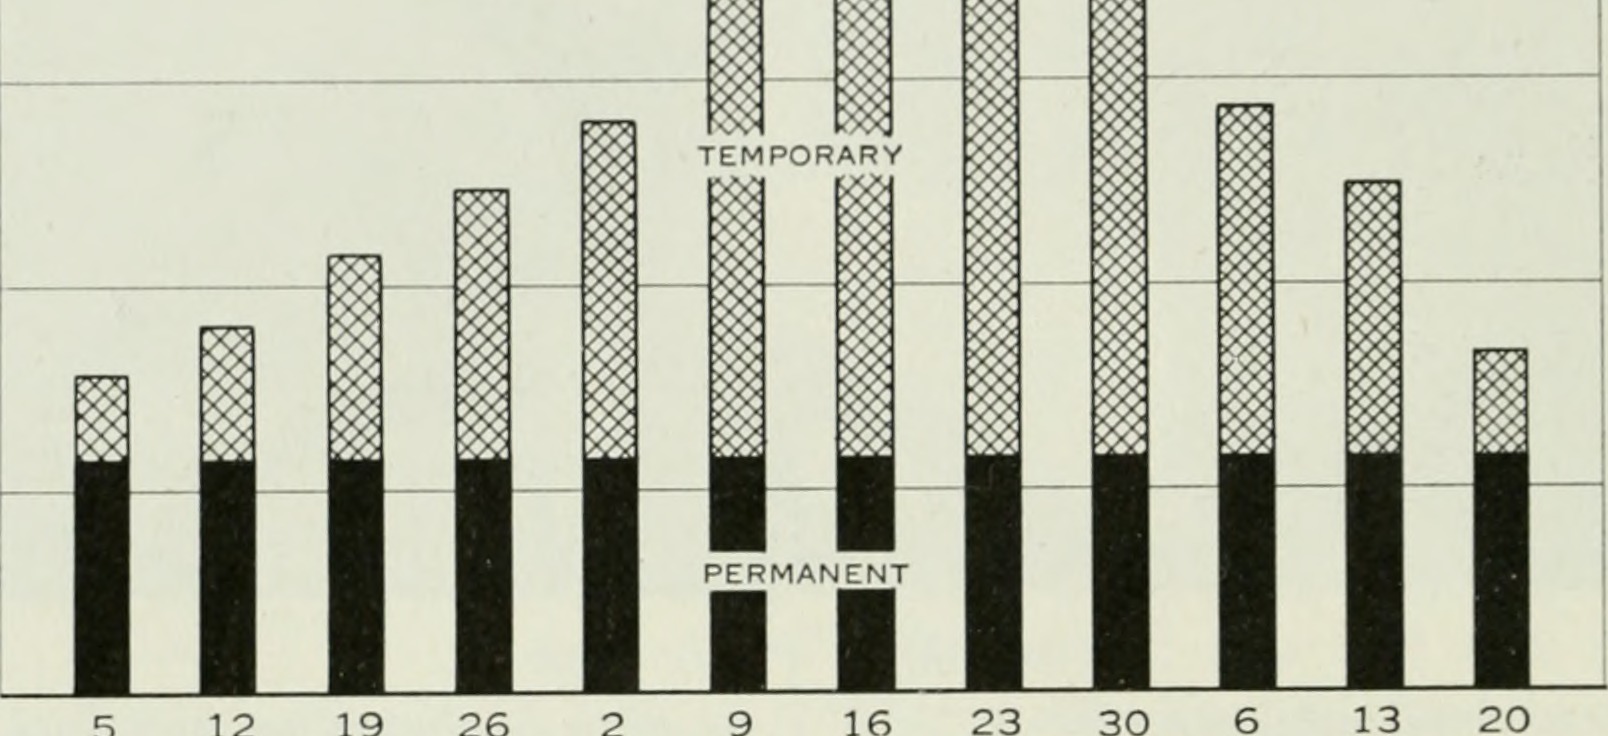 Image from page 255 of "Bell telephone magazine" (1922)